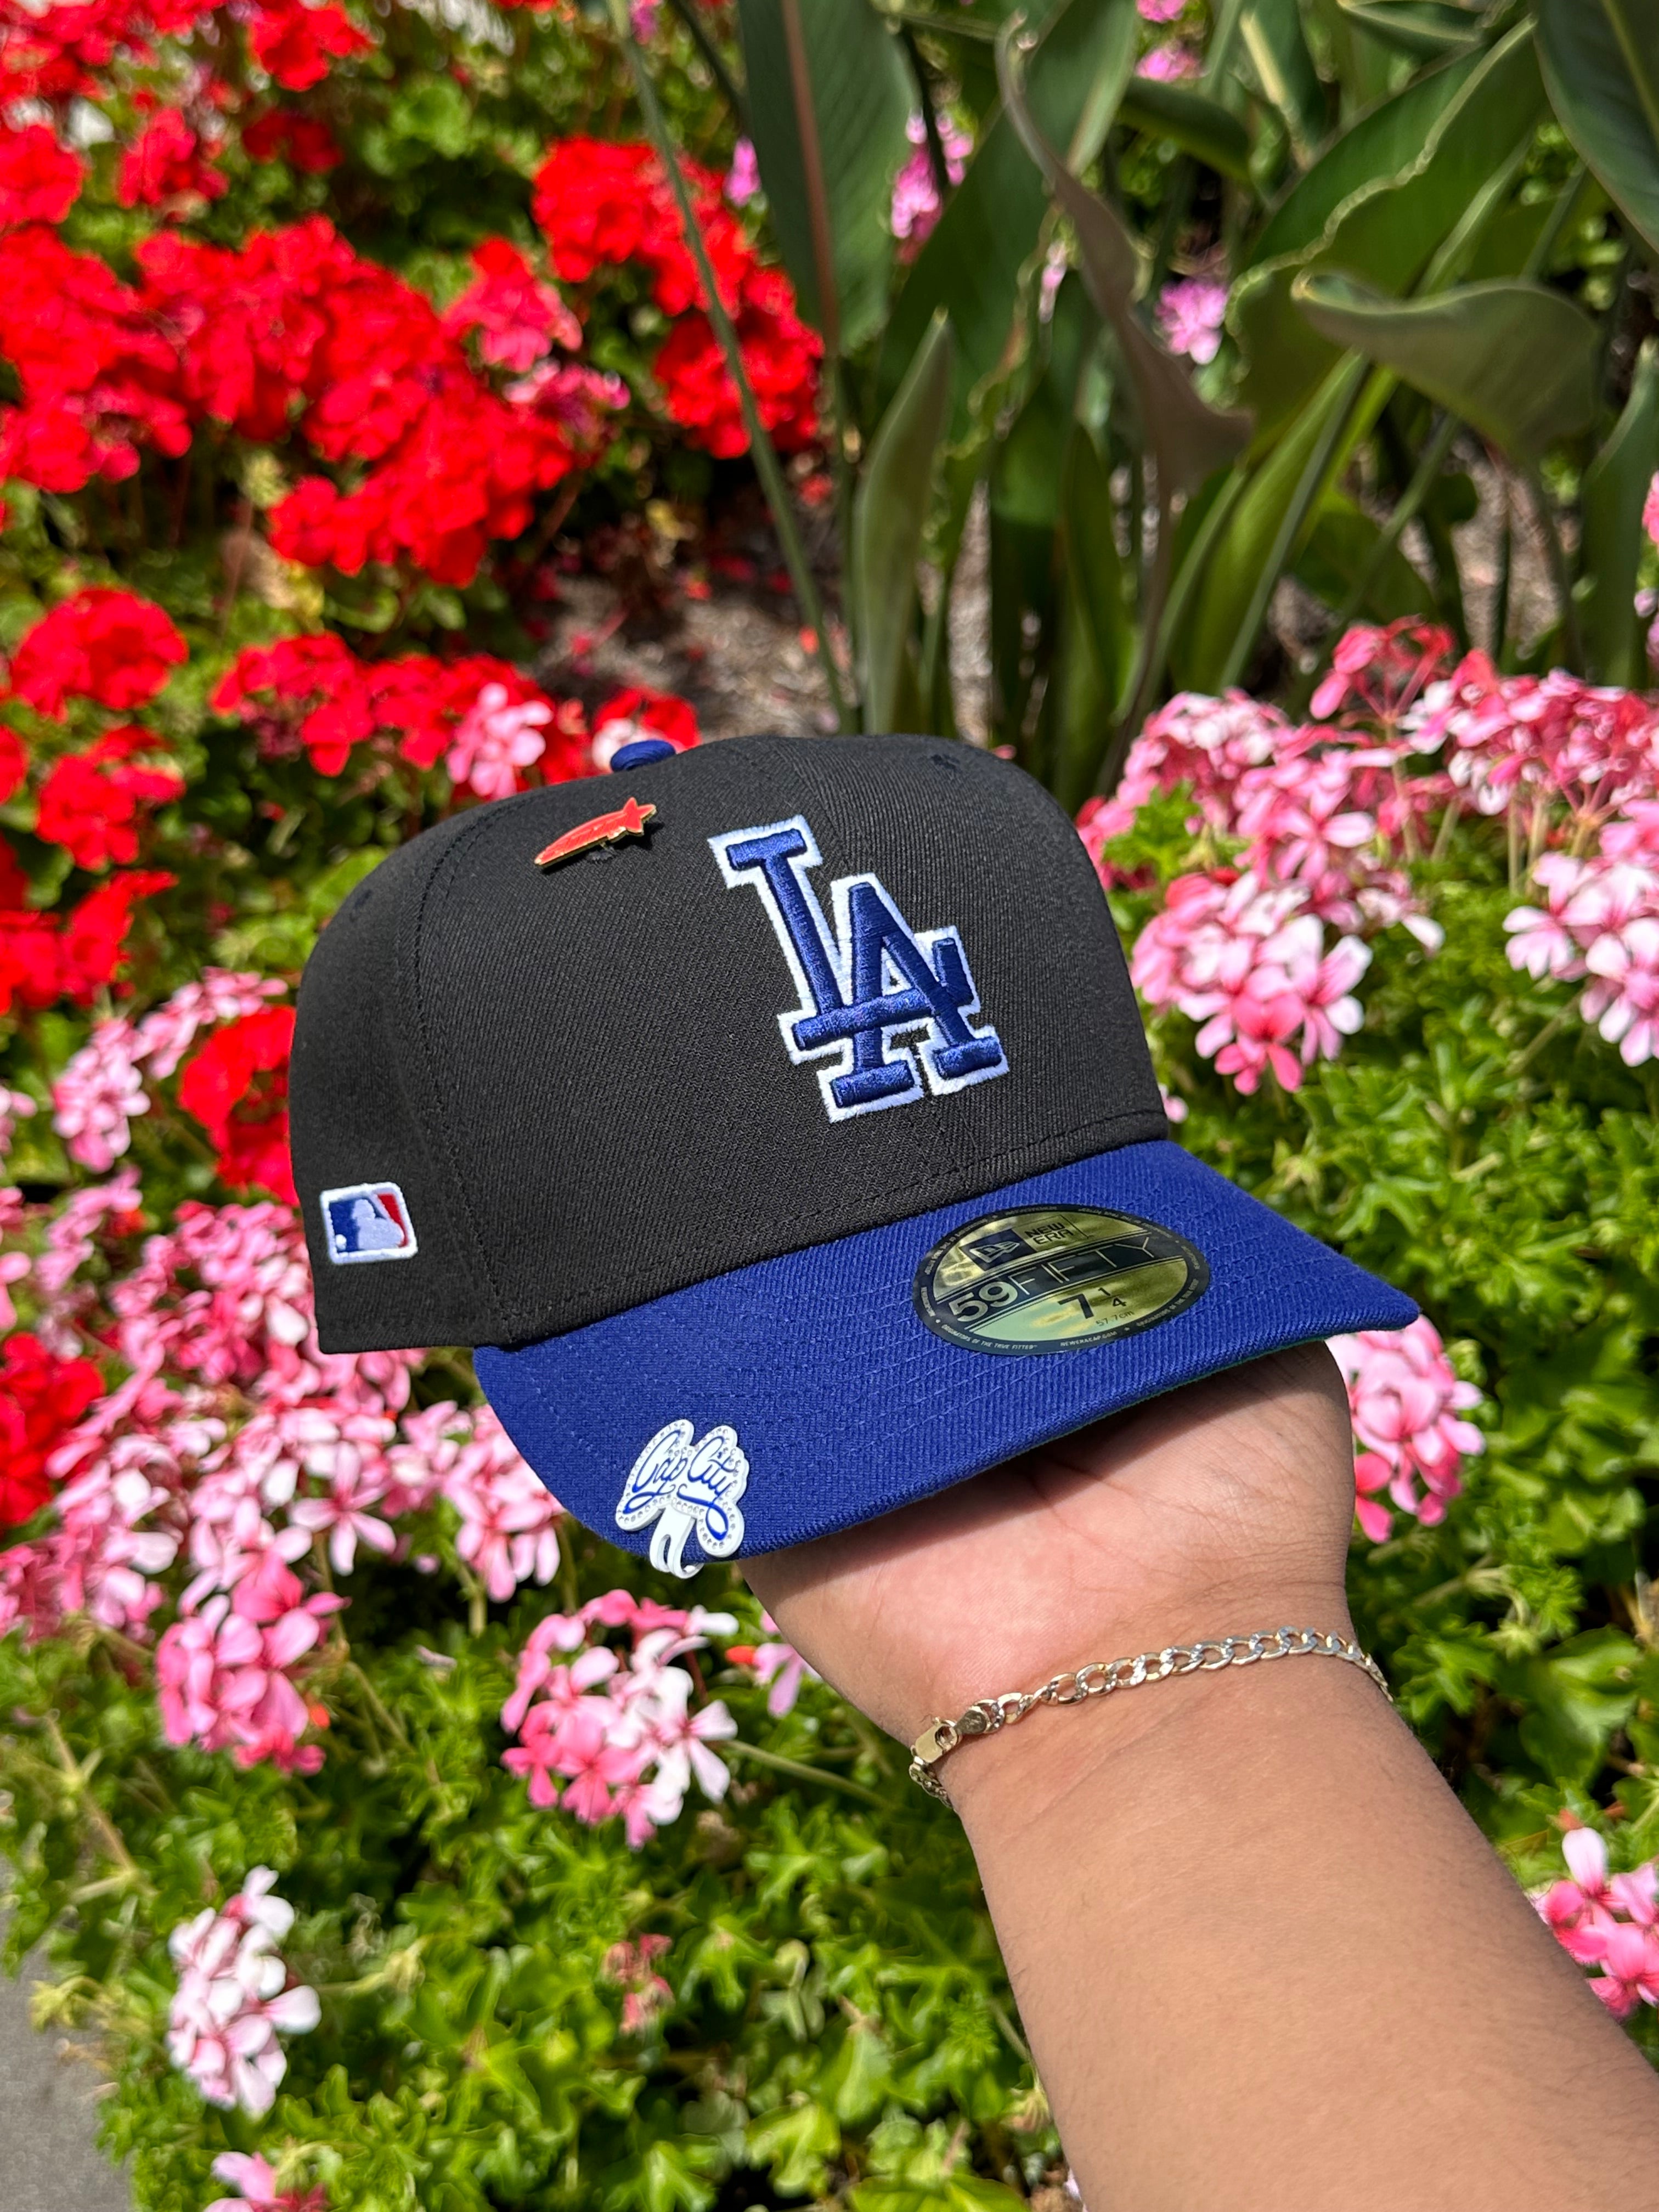 NEW ERA EXCLUSIVE 59FIFTY BLACK/BLUE LOS ANGELES DODGERS W/ MLB LOGO SIDE PATCH